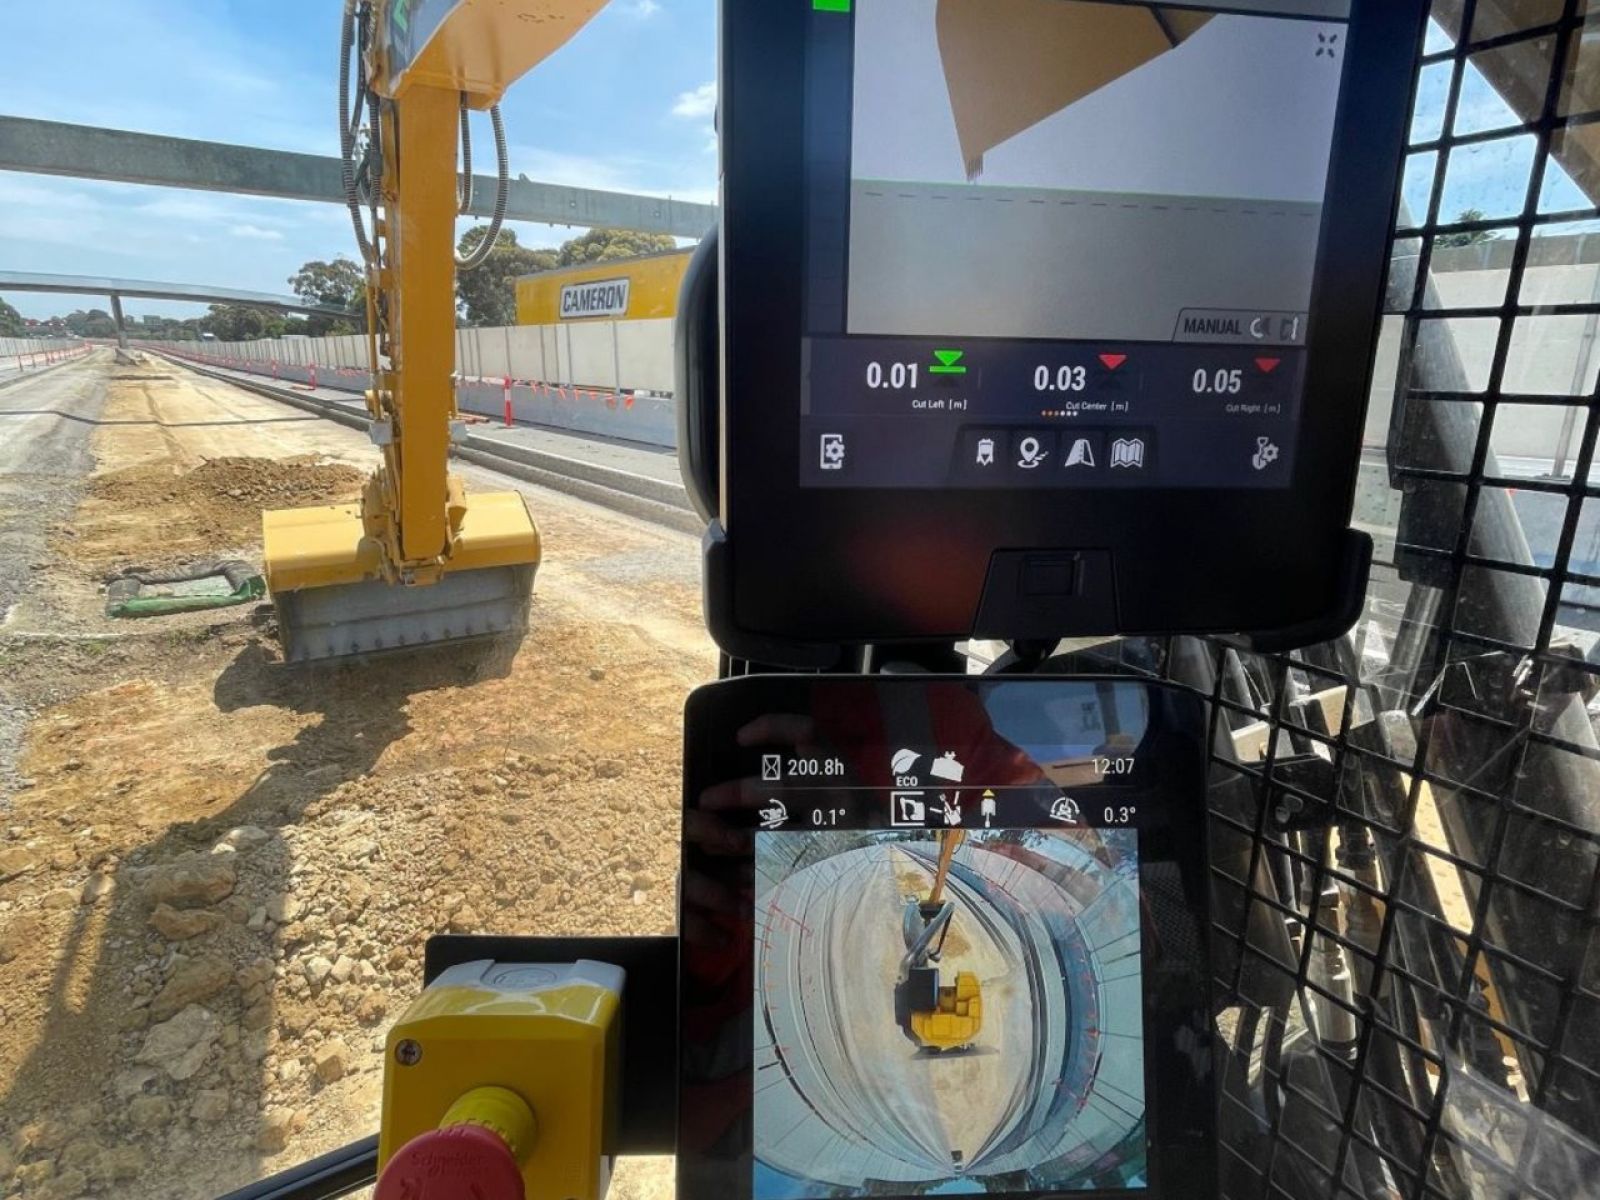 Digital display of the excavator operator’s 360-degree view, eliminating blind spots and revealing safety hazards.